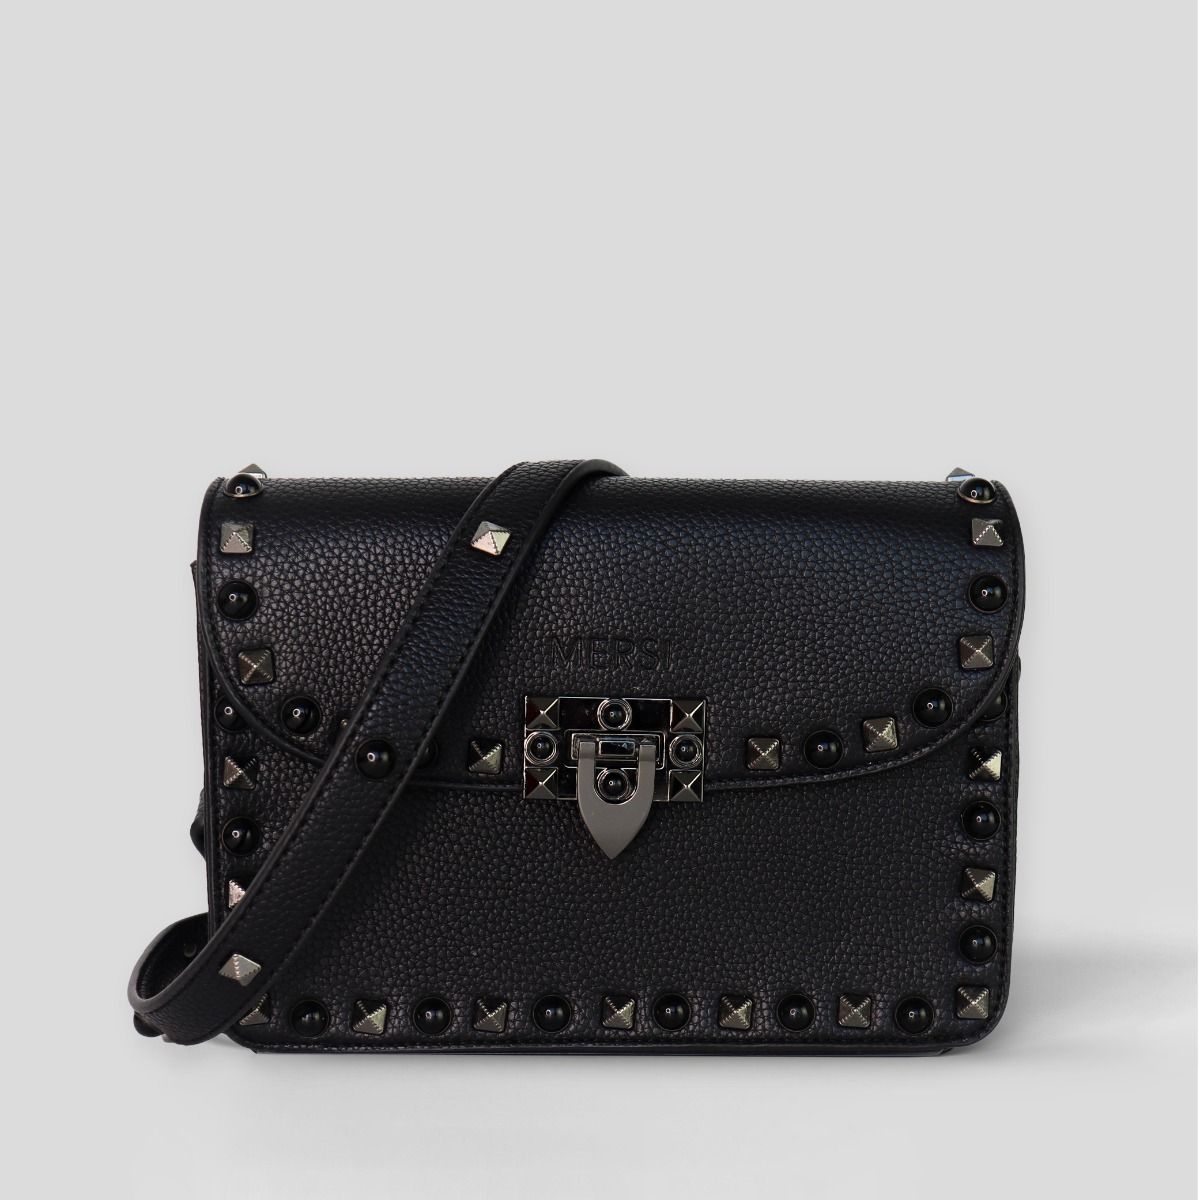 From studs to spikes, the new Gucci Bamboo 1947 bag might be your edgiest  accessory yet